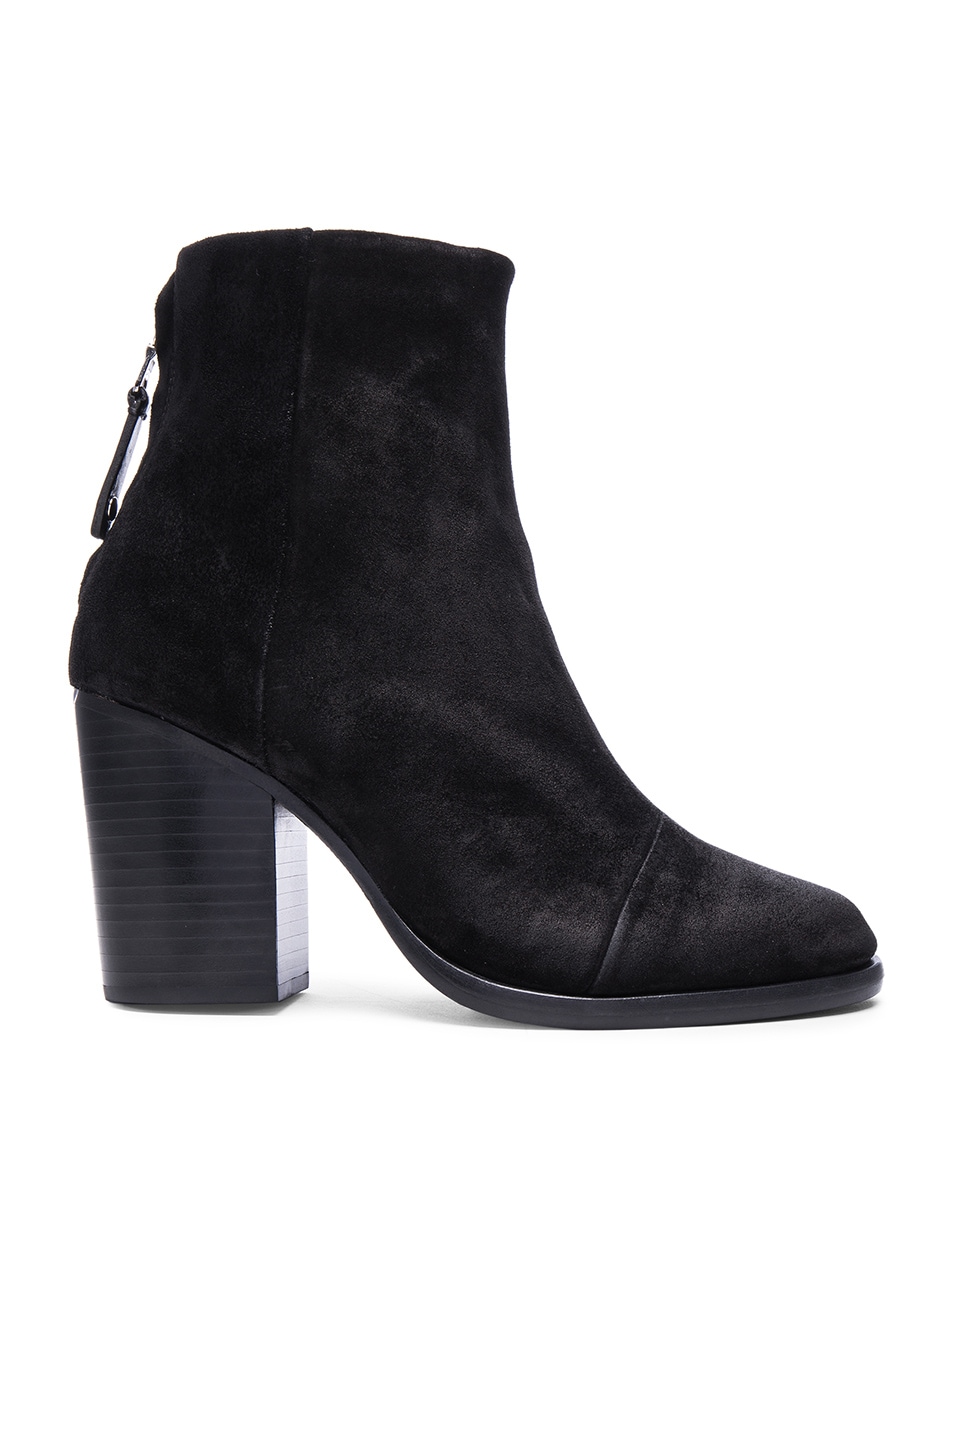 Image 1 of Rag & Bone Ashby Ankle Bootie in Black Suede